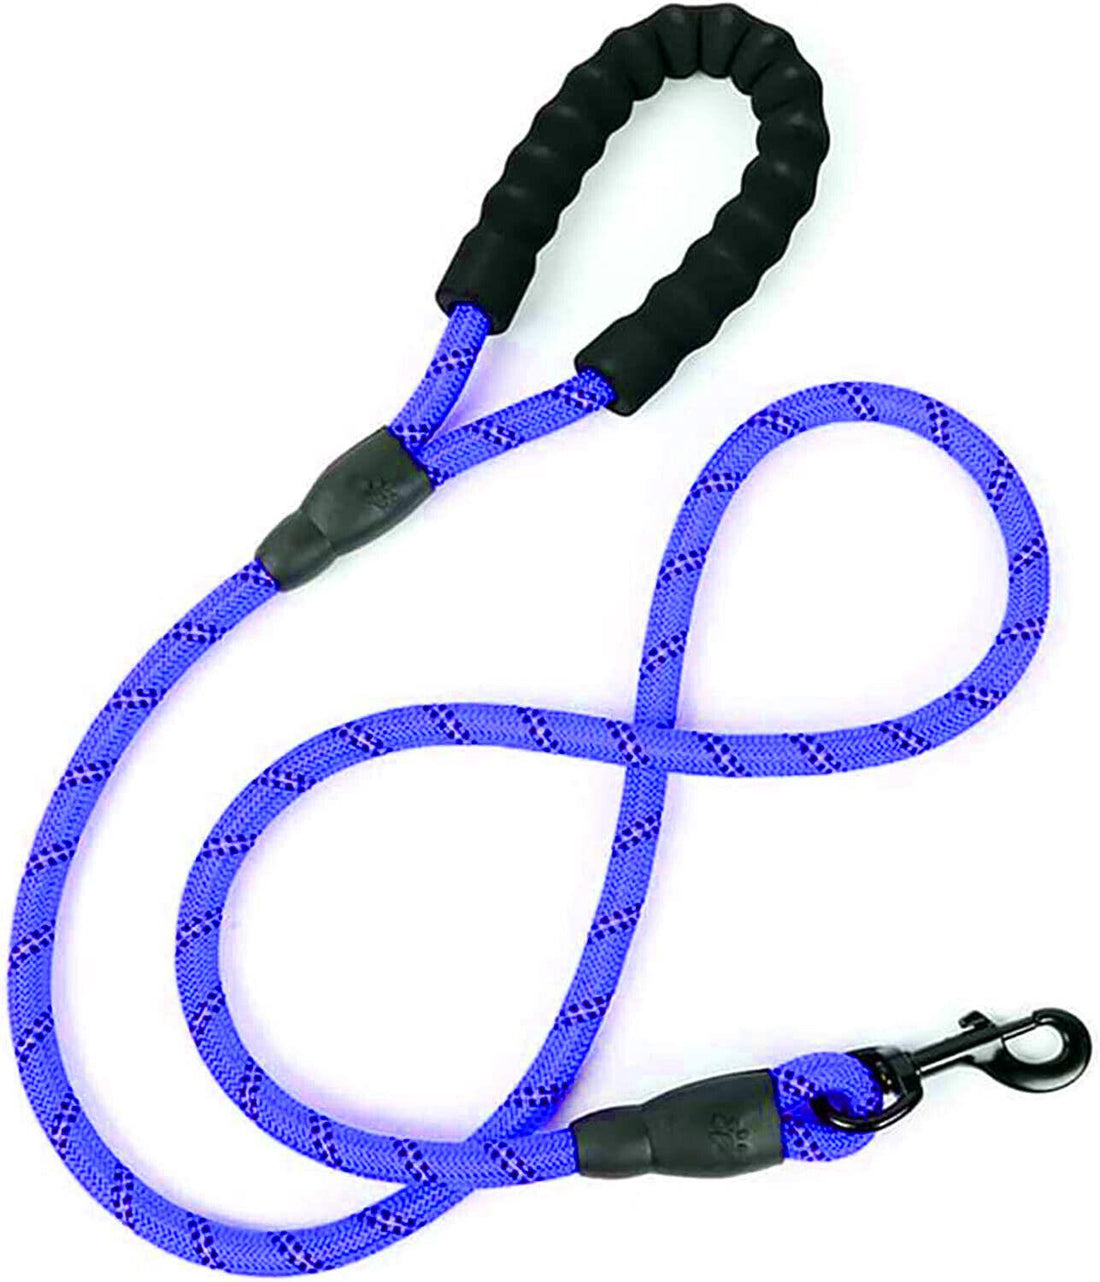 Dog Leash Rope Braided Pet Leads Strong Soft for Medium Large Dogs Walk 5FT New!